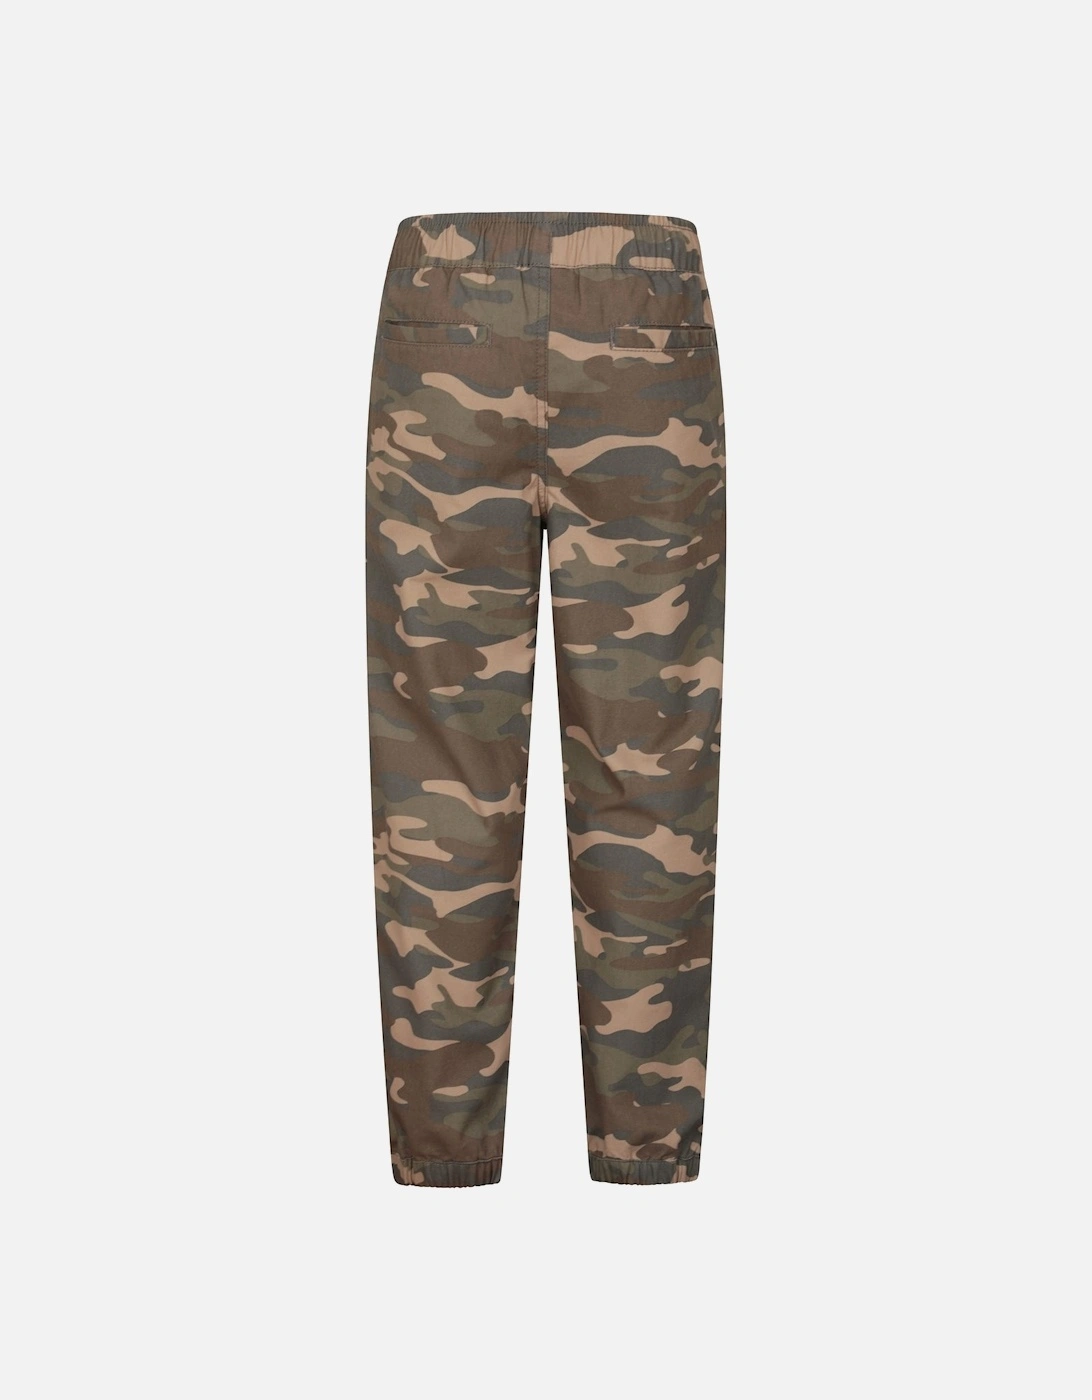 Childrens/Kids Camo Reinforced Knee Trousers